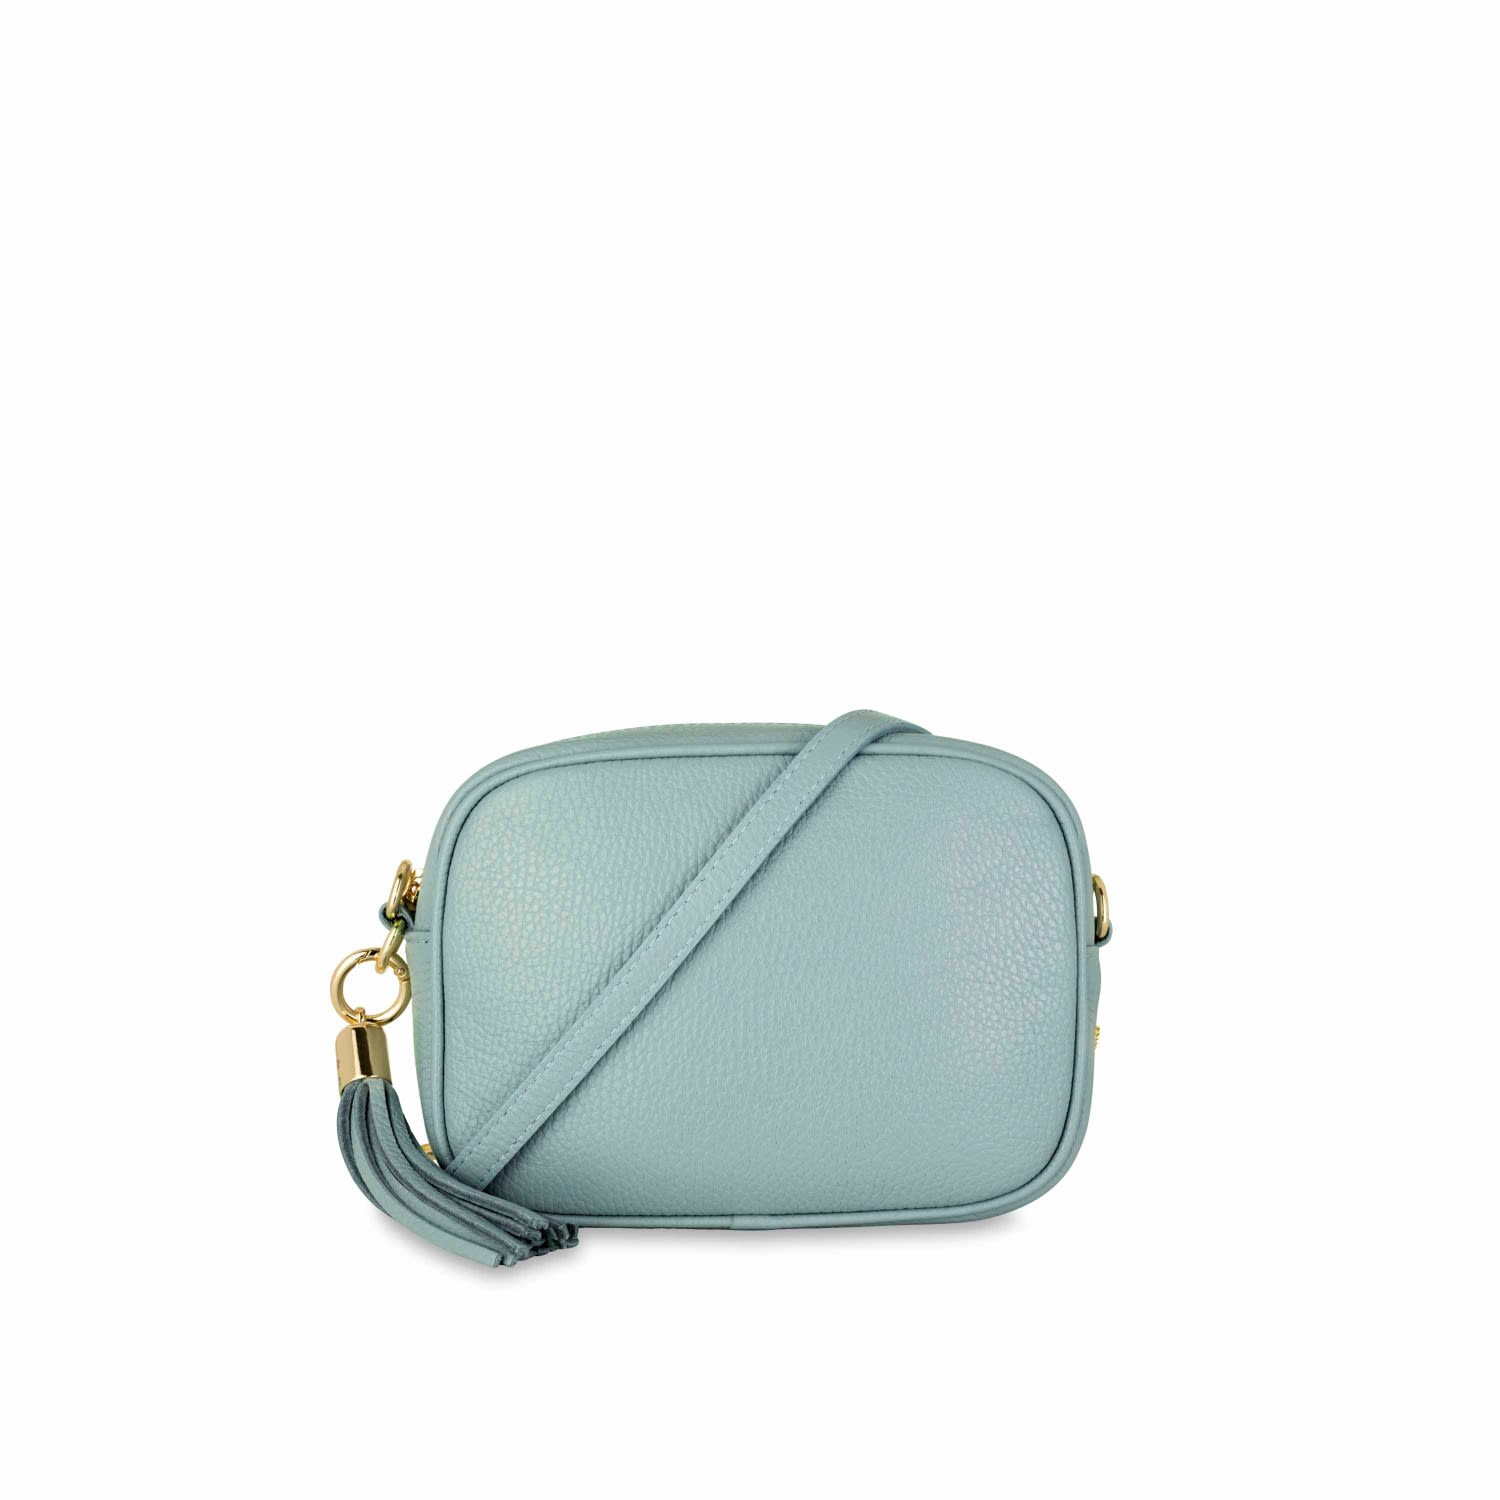 Apatchy London Women's The Tassel Pale Blue Leather Crossbody Bag